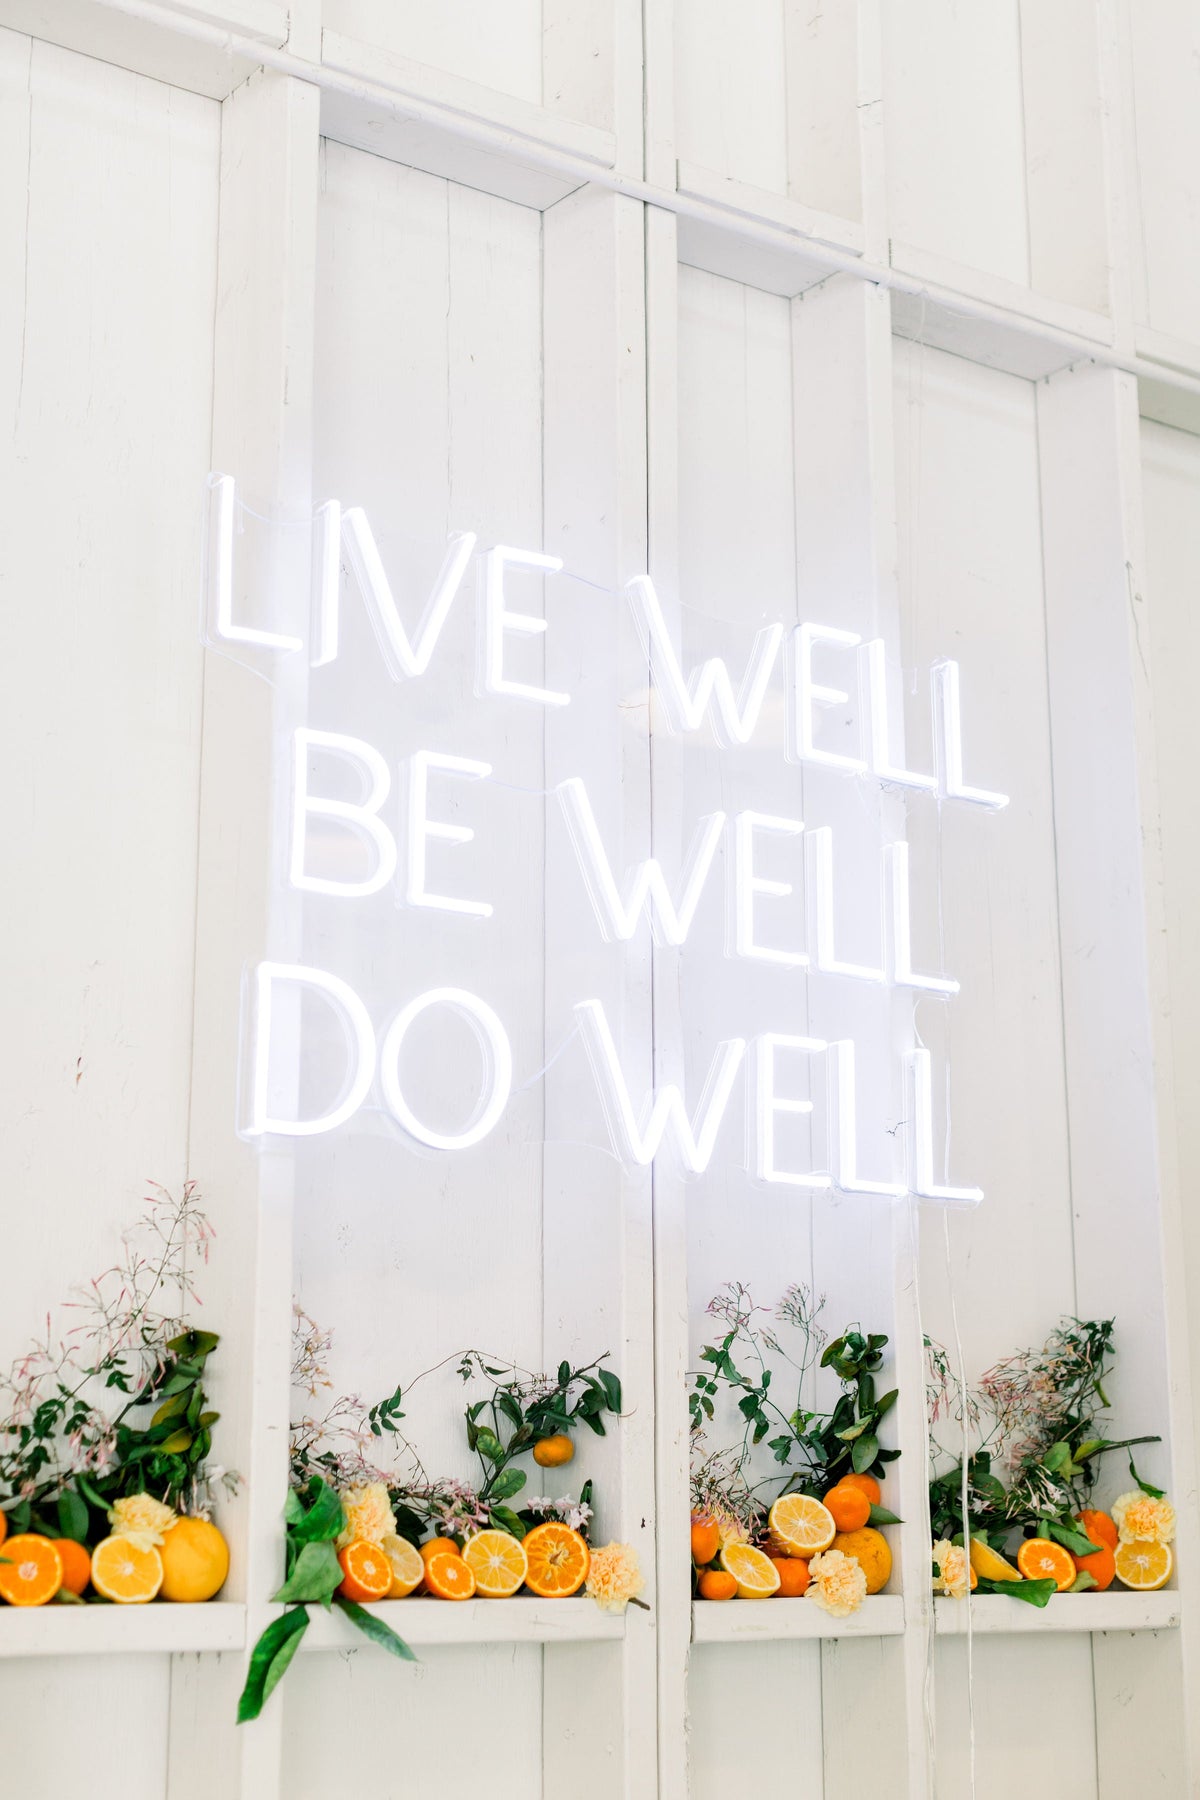 LIVE WELL BE WELL DO WELL